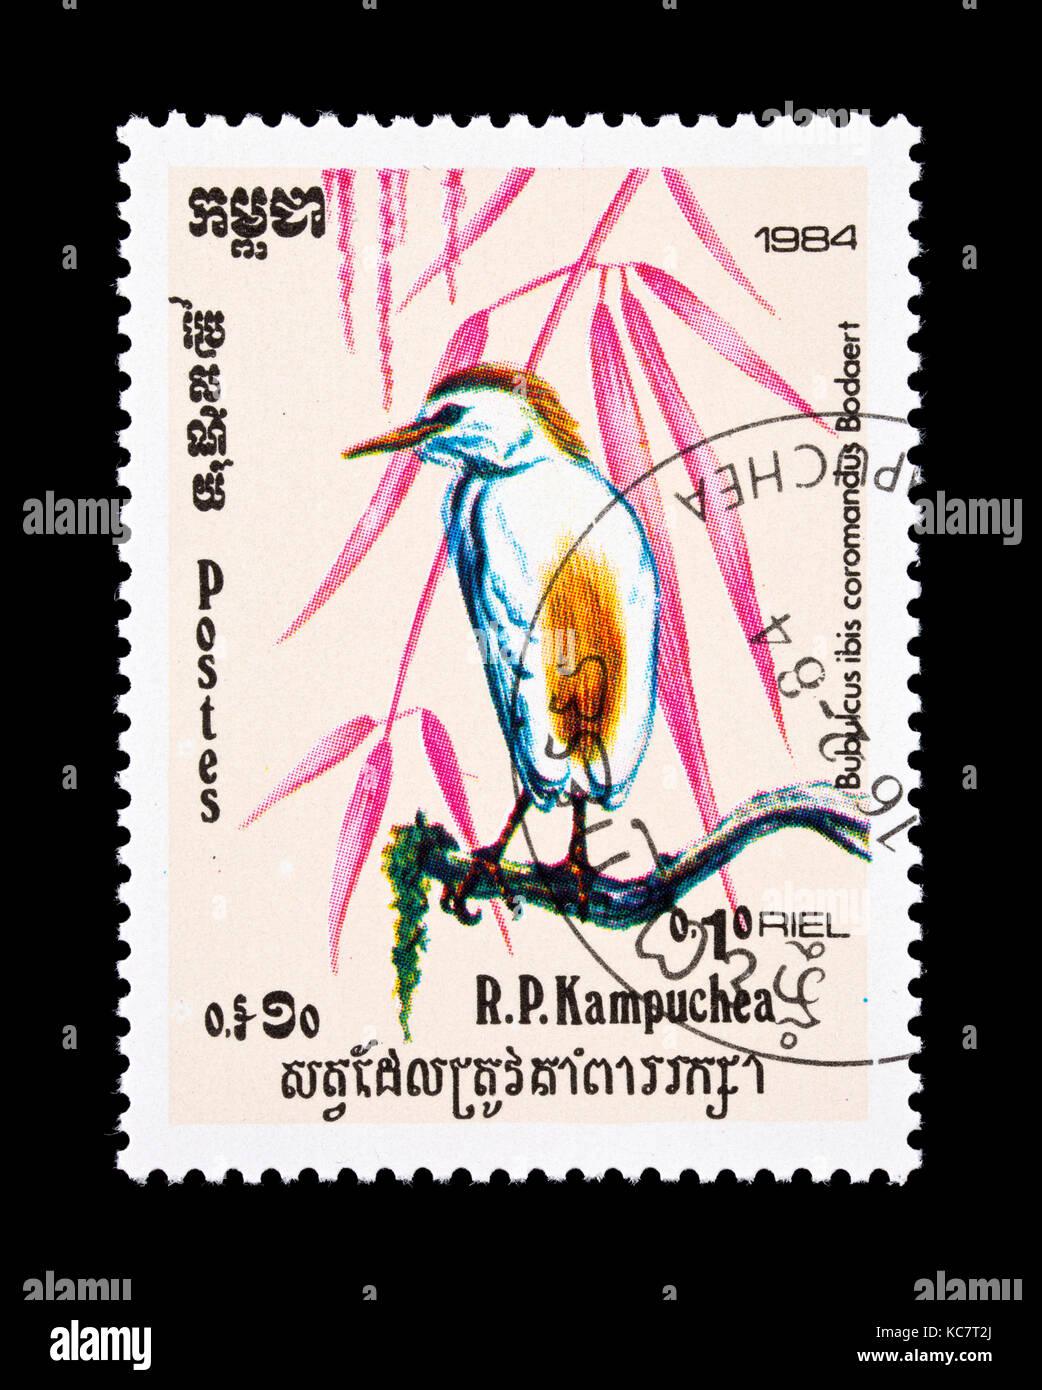 Postage stamp from Cambodia (Kampuchea) depicting a (Bubulcus ibis) Stock Photo